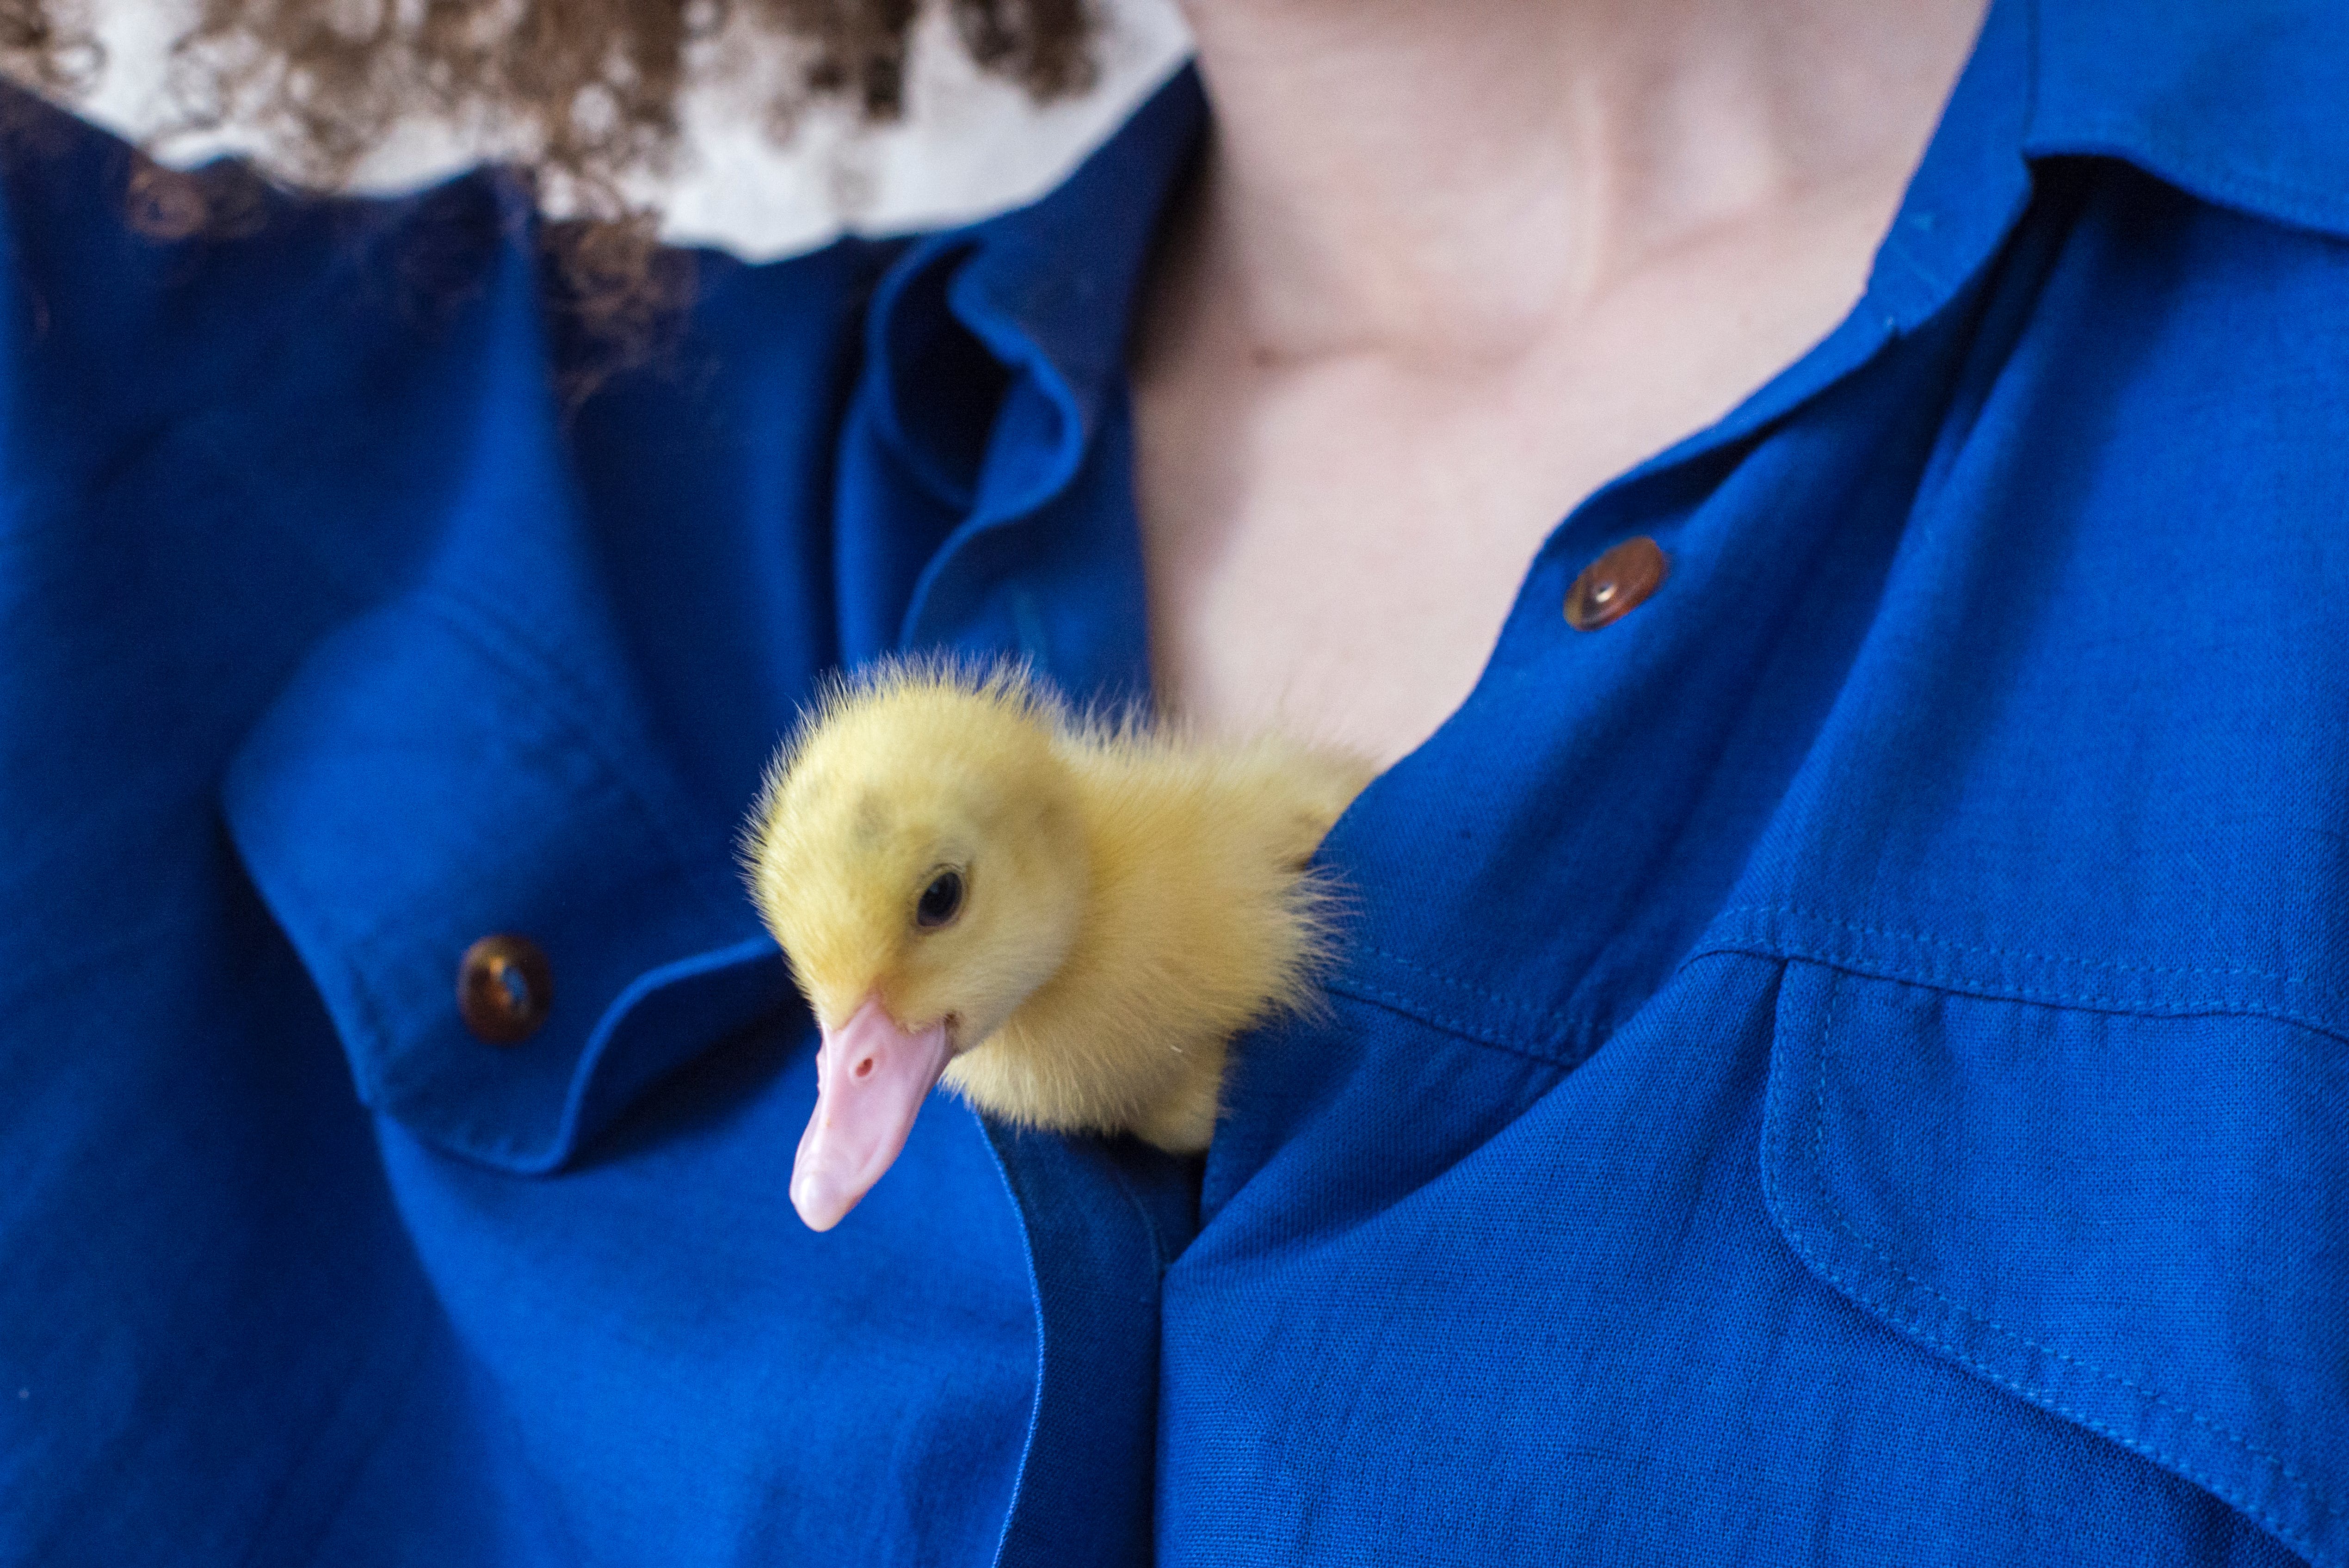 duckling in the shirt